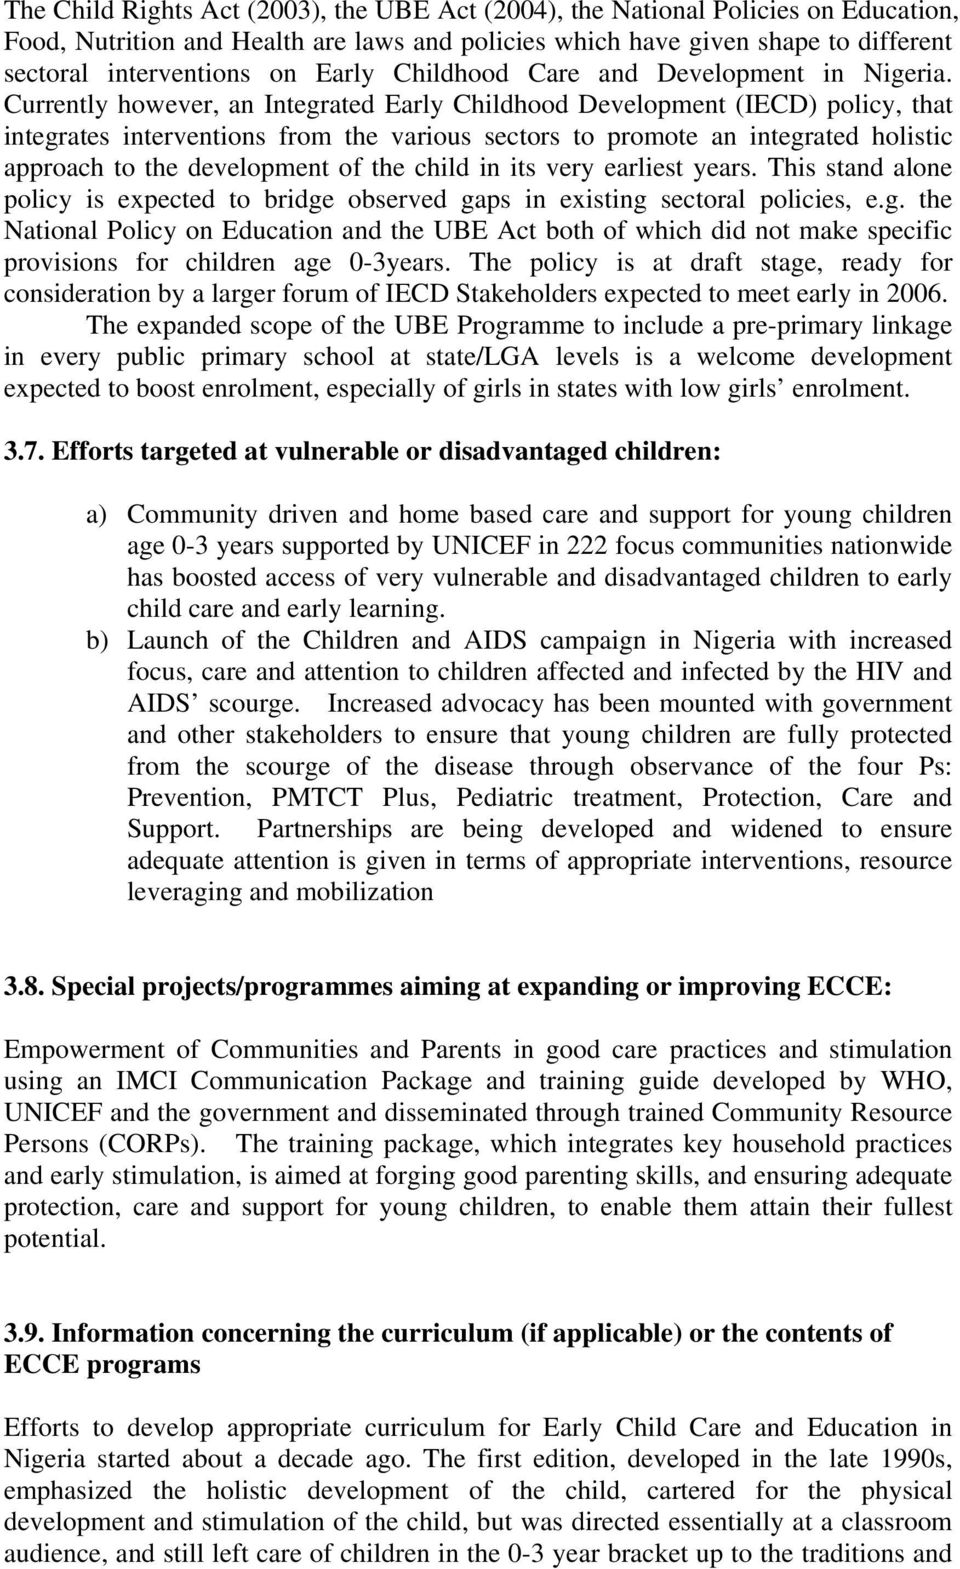 Currently however, an Integrated Early Childhood Development (IECD) policy, that integrates interventions from the various sectors to promote an integrated holistic approach to the development of the